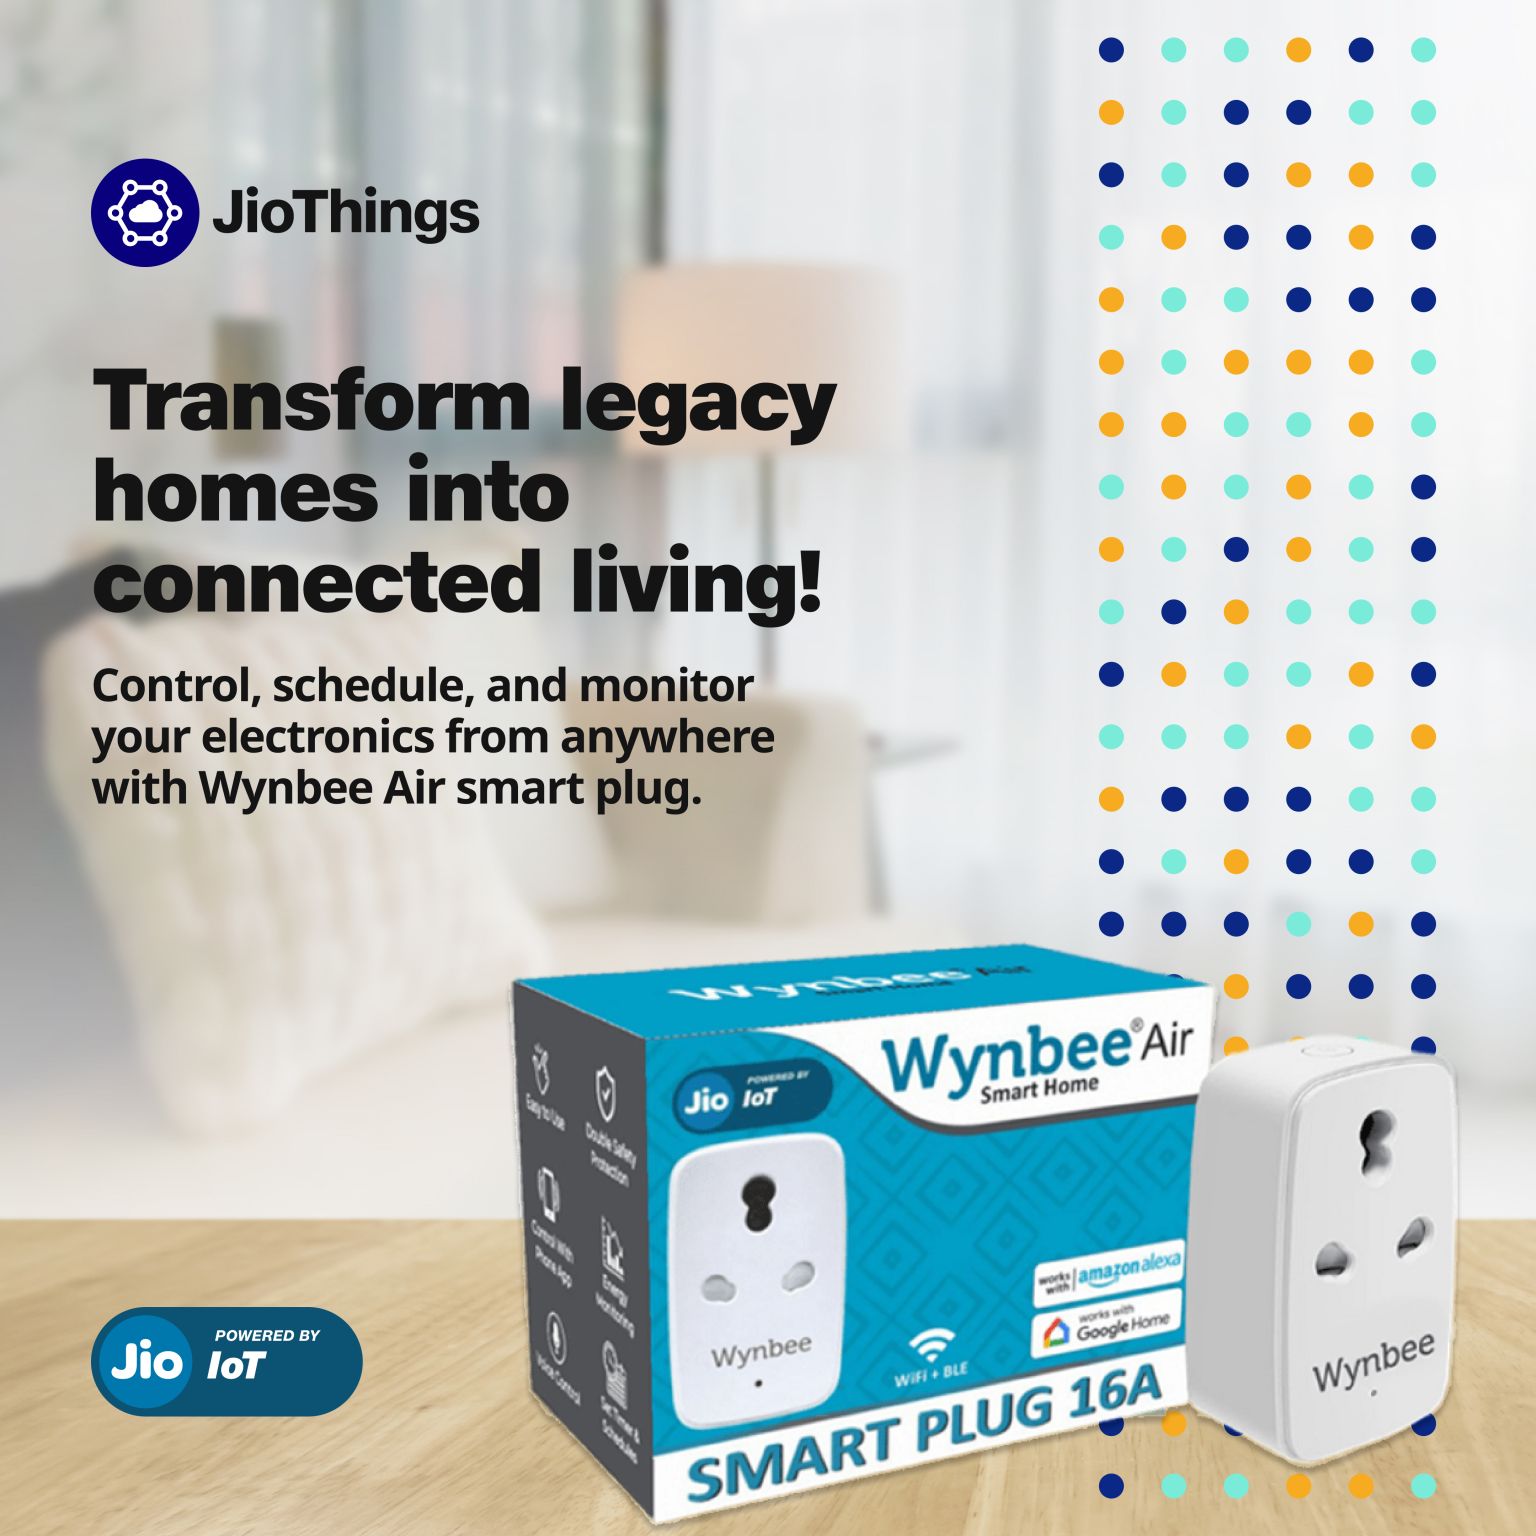 Jio IoT Launches Wynbee Smart Plug, Redefining Smart Living!!